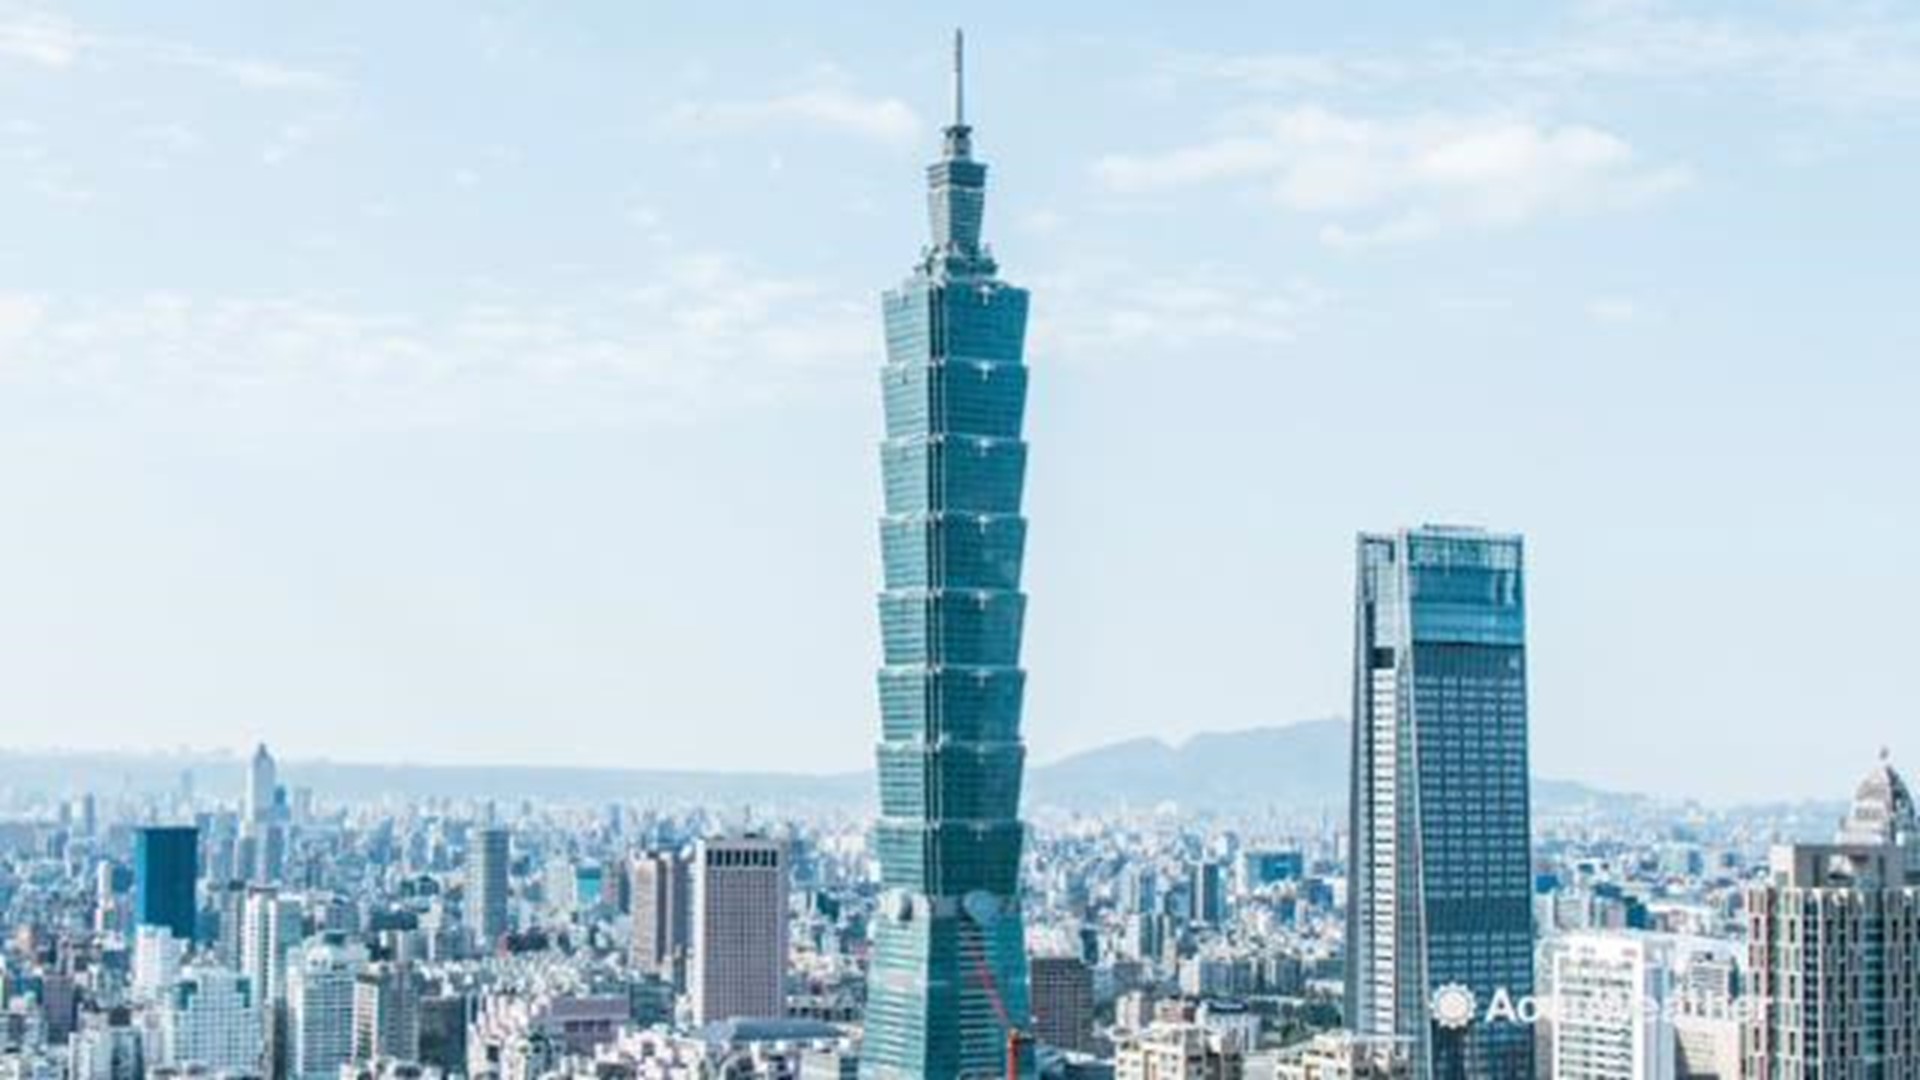 Located in the Taiwanese capital, the Taipei 101 is one of the tallest buildings in the world.  It also gets tested frequently by earthquakes and winds from typhoons.  Let's learn how the skyscraper can withstand the the force of these disasters.